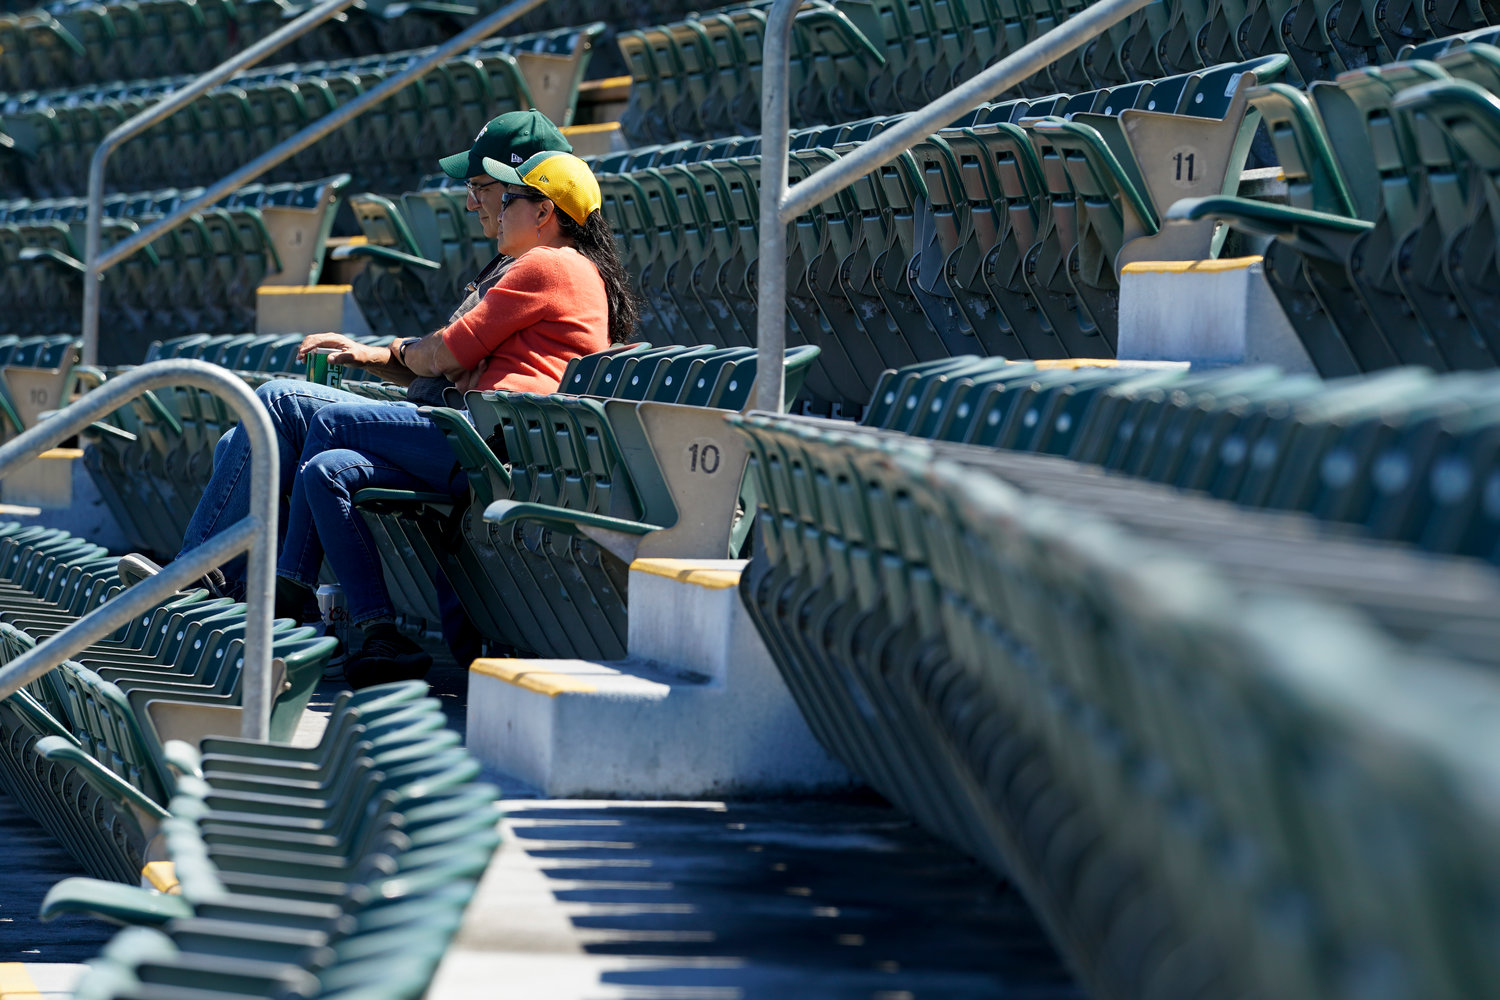 Fans attend the first baseball game of a doubleheader between the Oakland Athletics and the Detroit Tigers in Oakland, Calif., Thursday, July 21, 2022. (AP Photo/Godofredo A. V√°squez)